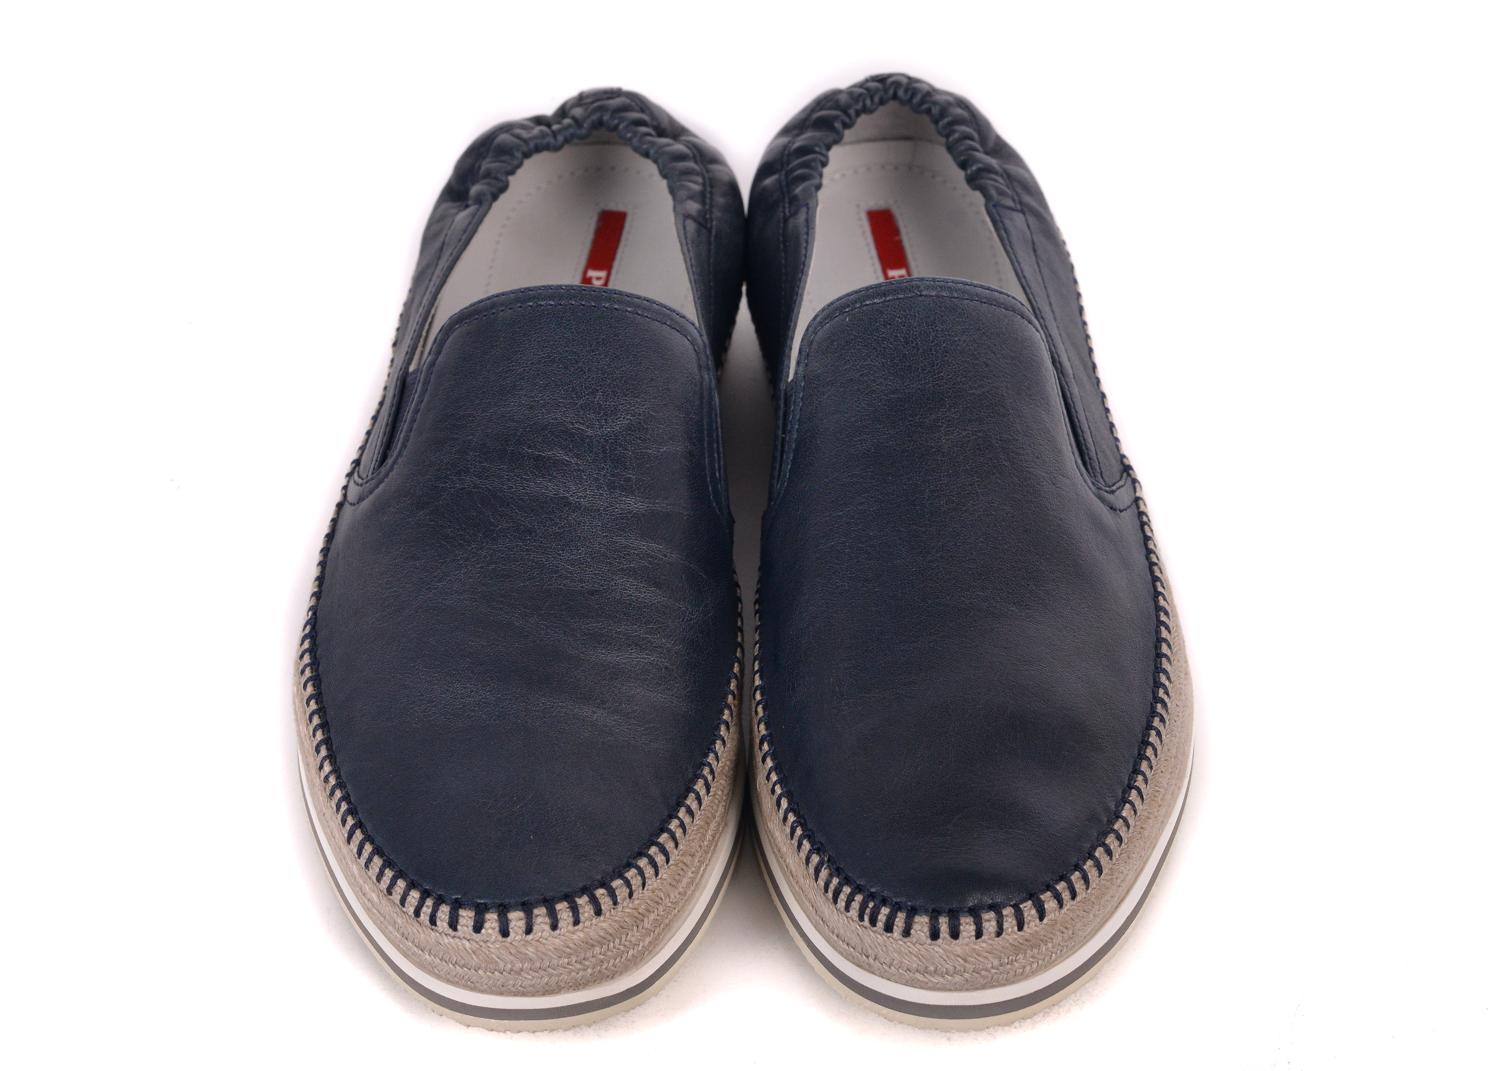 Prada reintroduces the navy leather loafers with this unconventional wonder, leather upper, braided  sidewall  and rubber sole.  You can pair this shoe with a aerated linen outfit for the perfect summer appeal.

Leather
Braided sidewall
Rubber